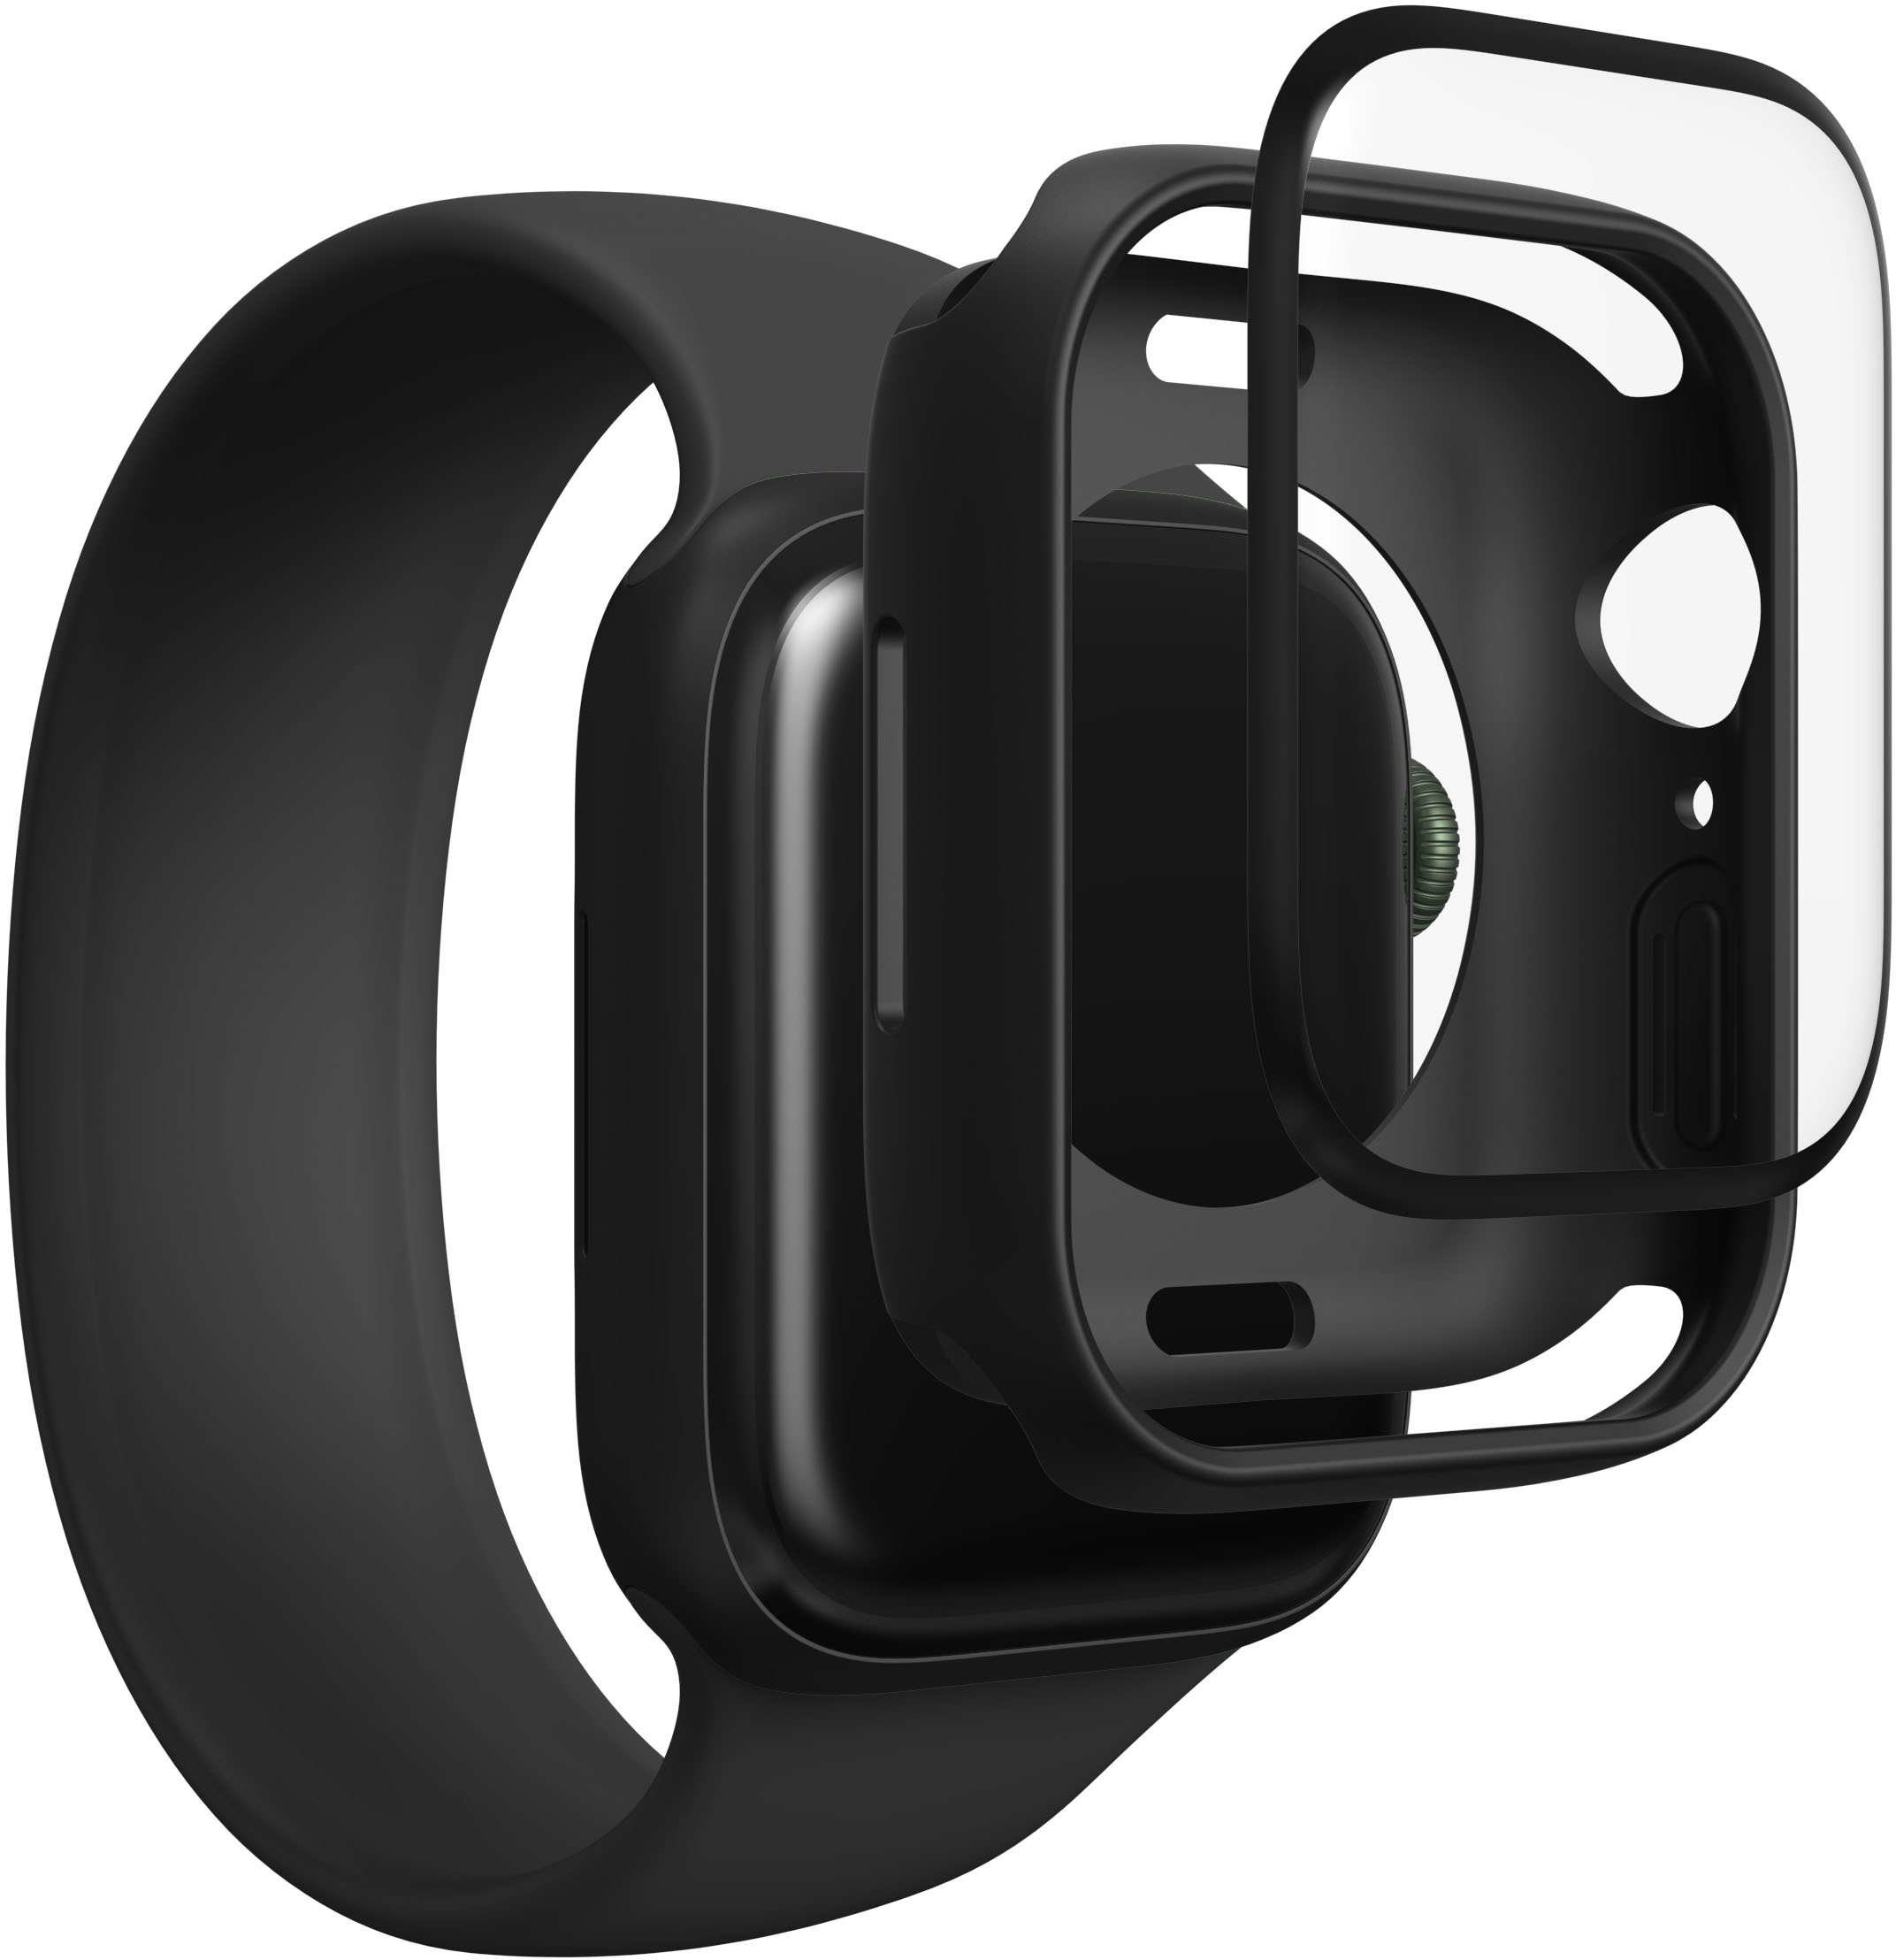 ZAGG - InvisibleShield GlassFusion+ 360 Flexible Hybrid Screen Protector + Bumper for Apple Watch Series 7 45mm - Black